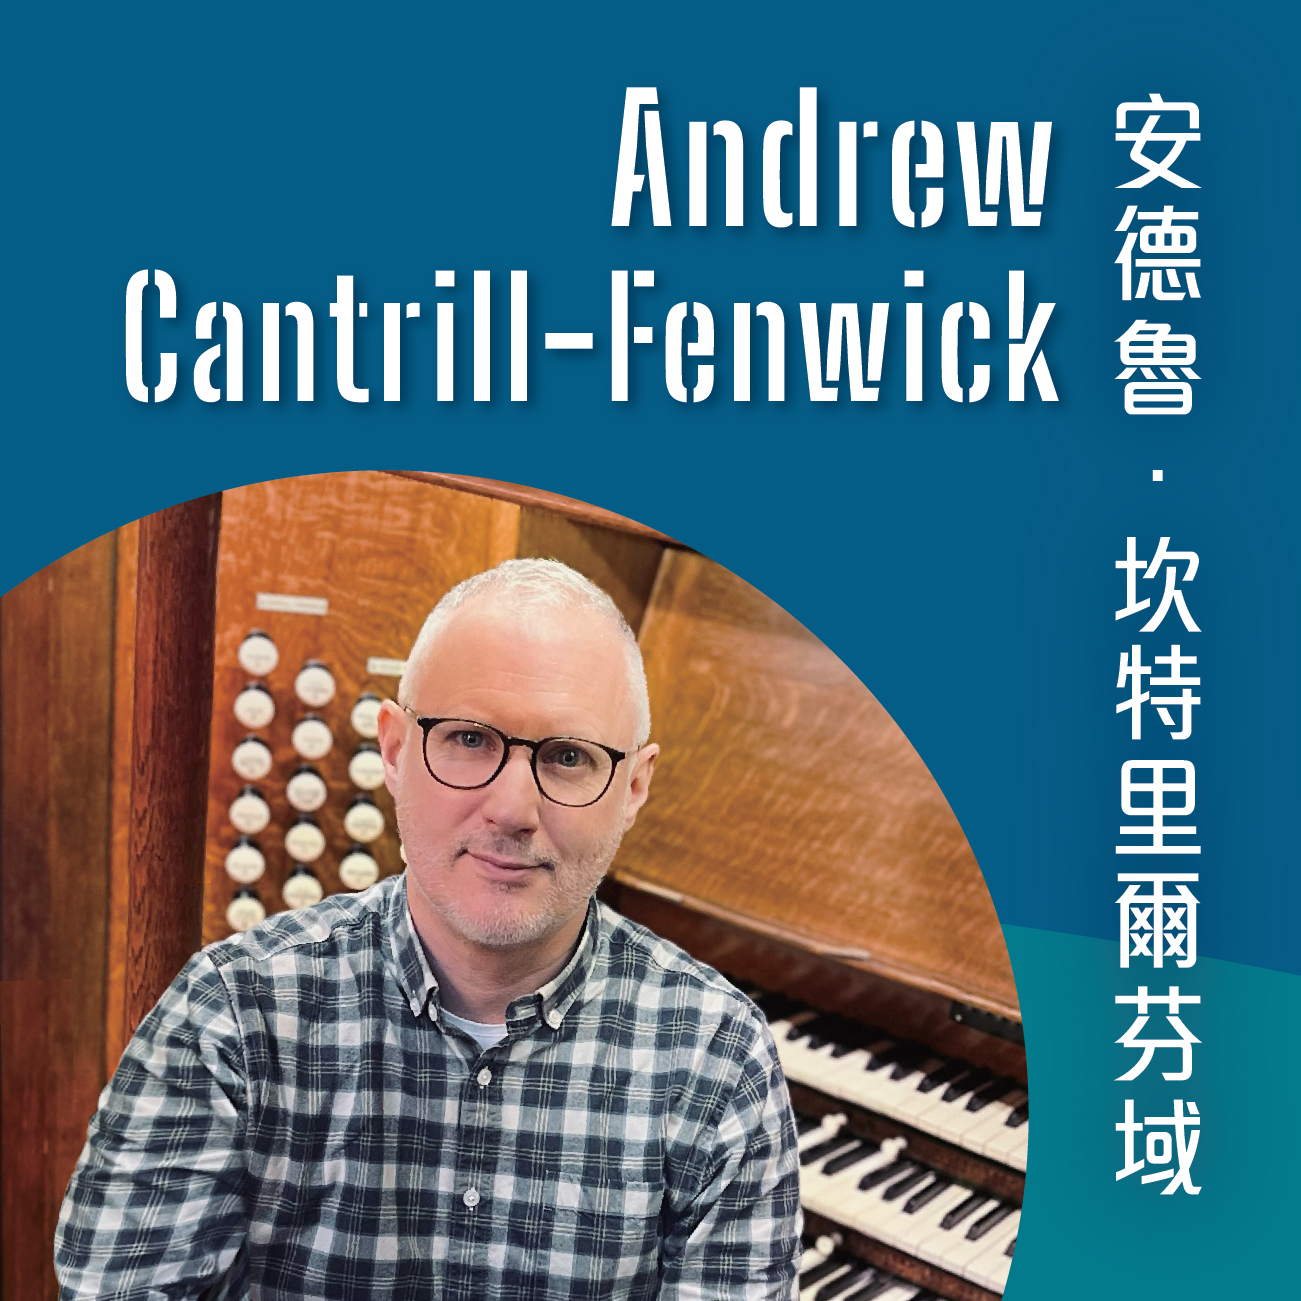 Pipe Organ Recital by Andrew Cantrill-Fenwick
